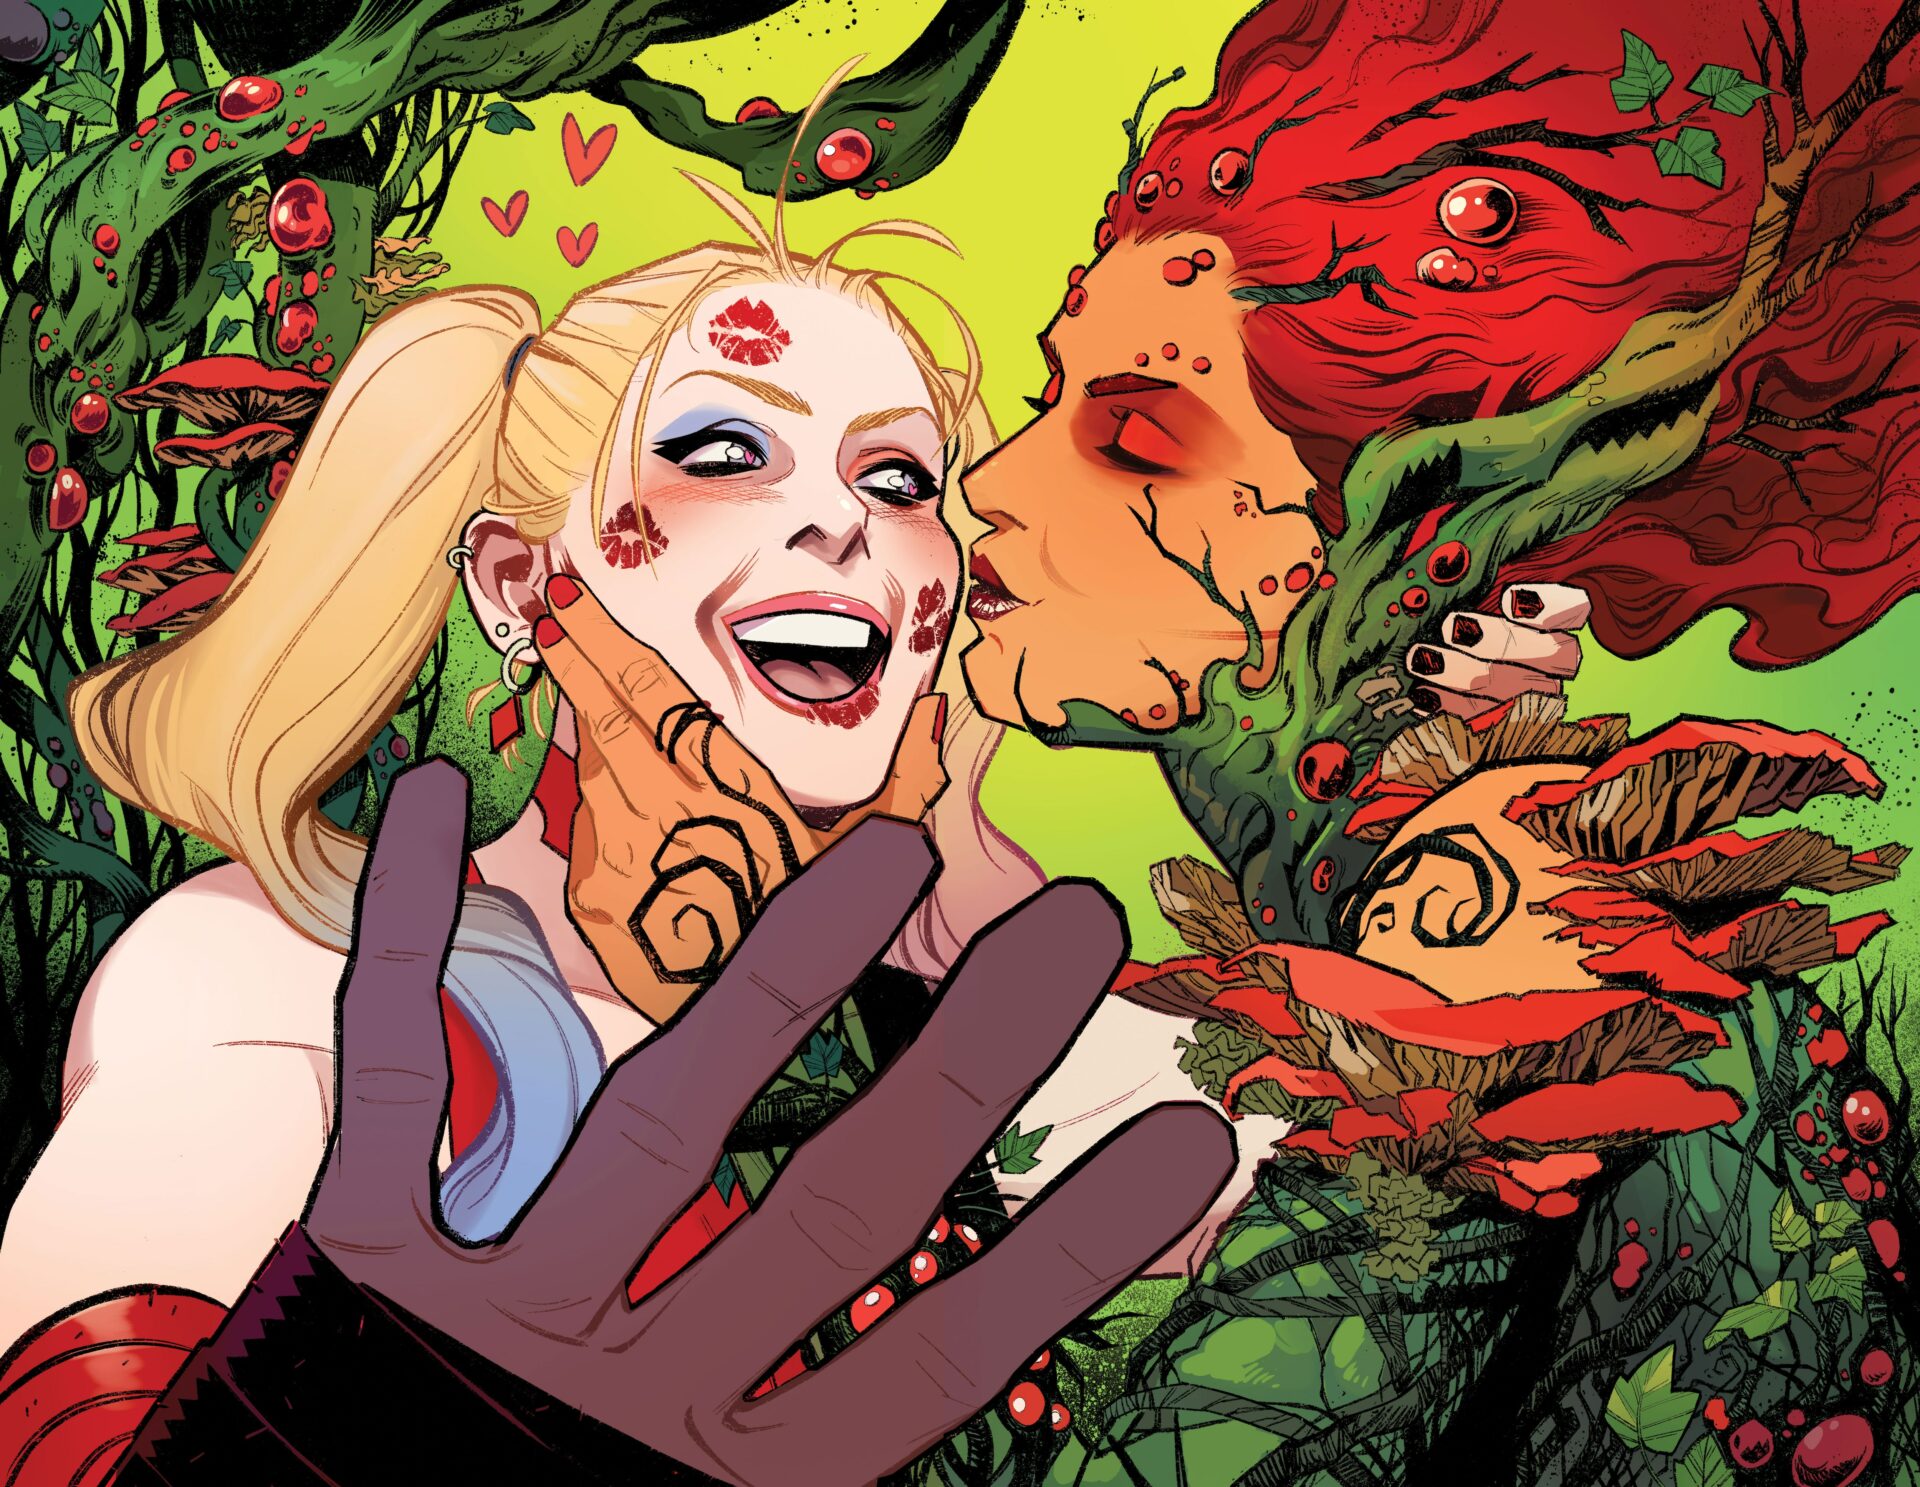 Pride connecting covers for Harley Quinn #31 and Poison Ivy #13